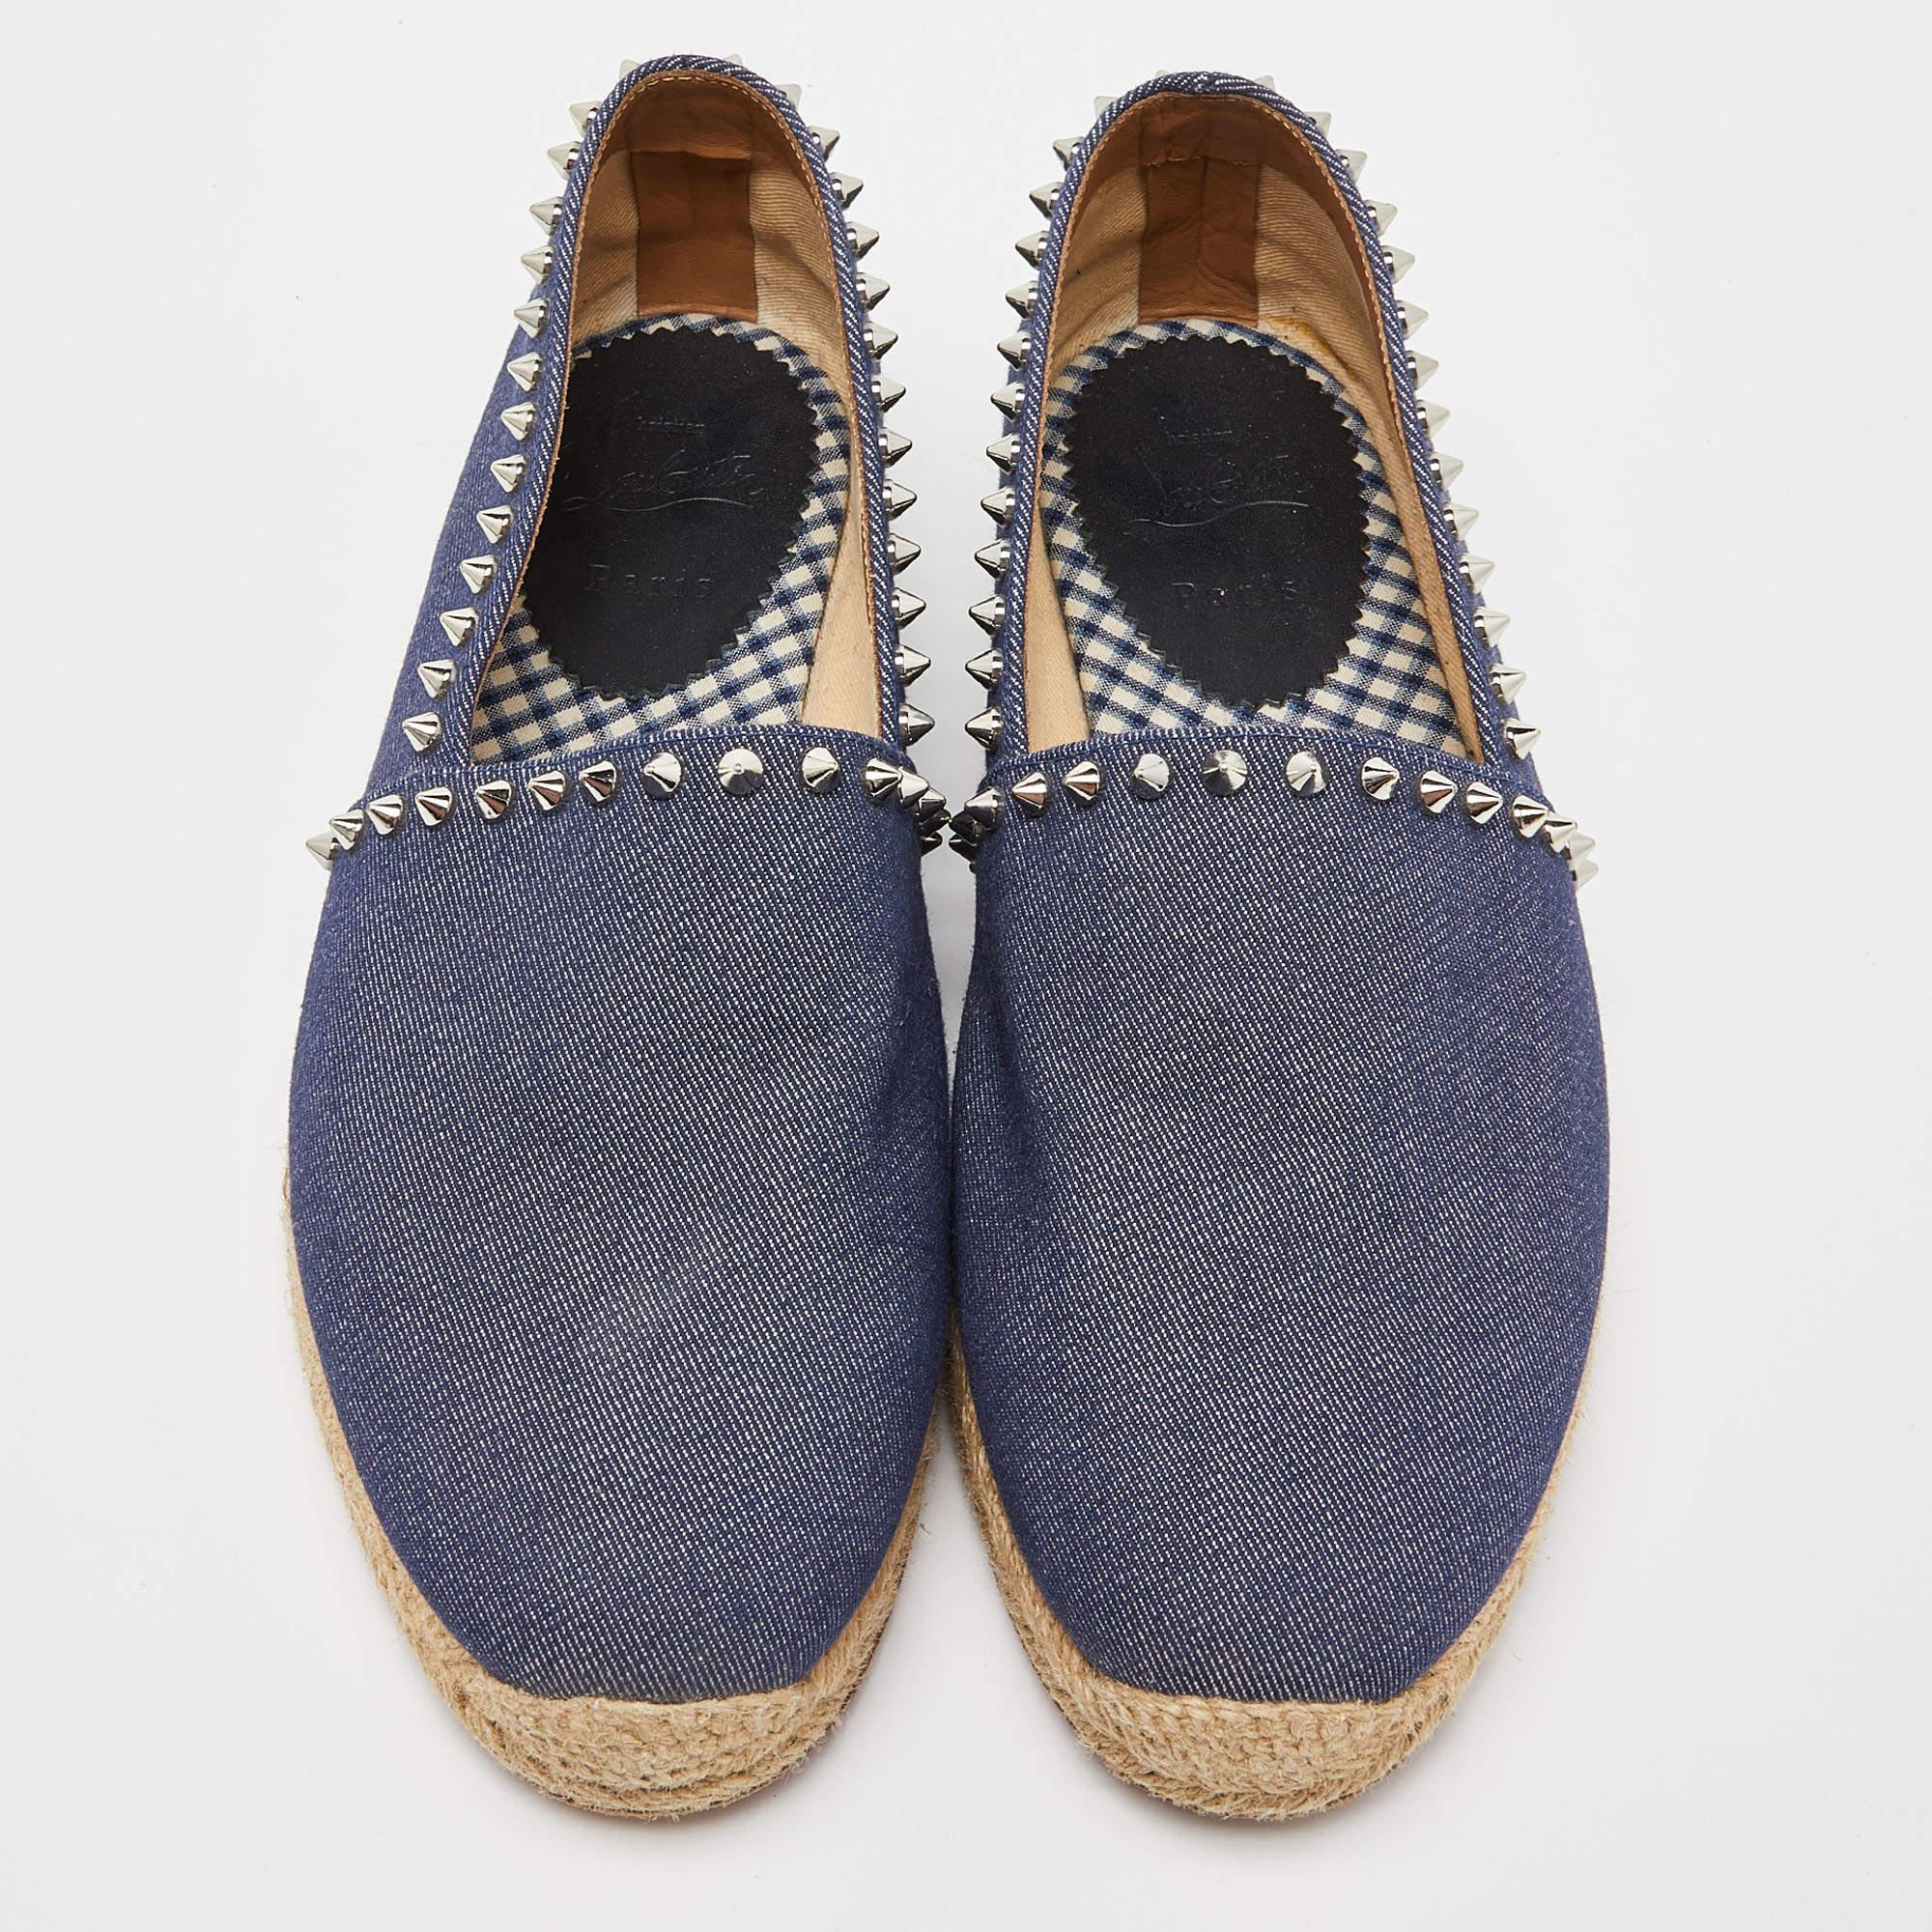 Wonderfully-crafted shoes added with notable elements to fit well and pair perfectly with all your plans. Make these designer espadrilles yours today!

